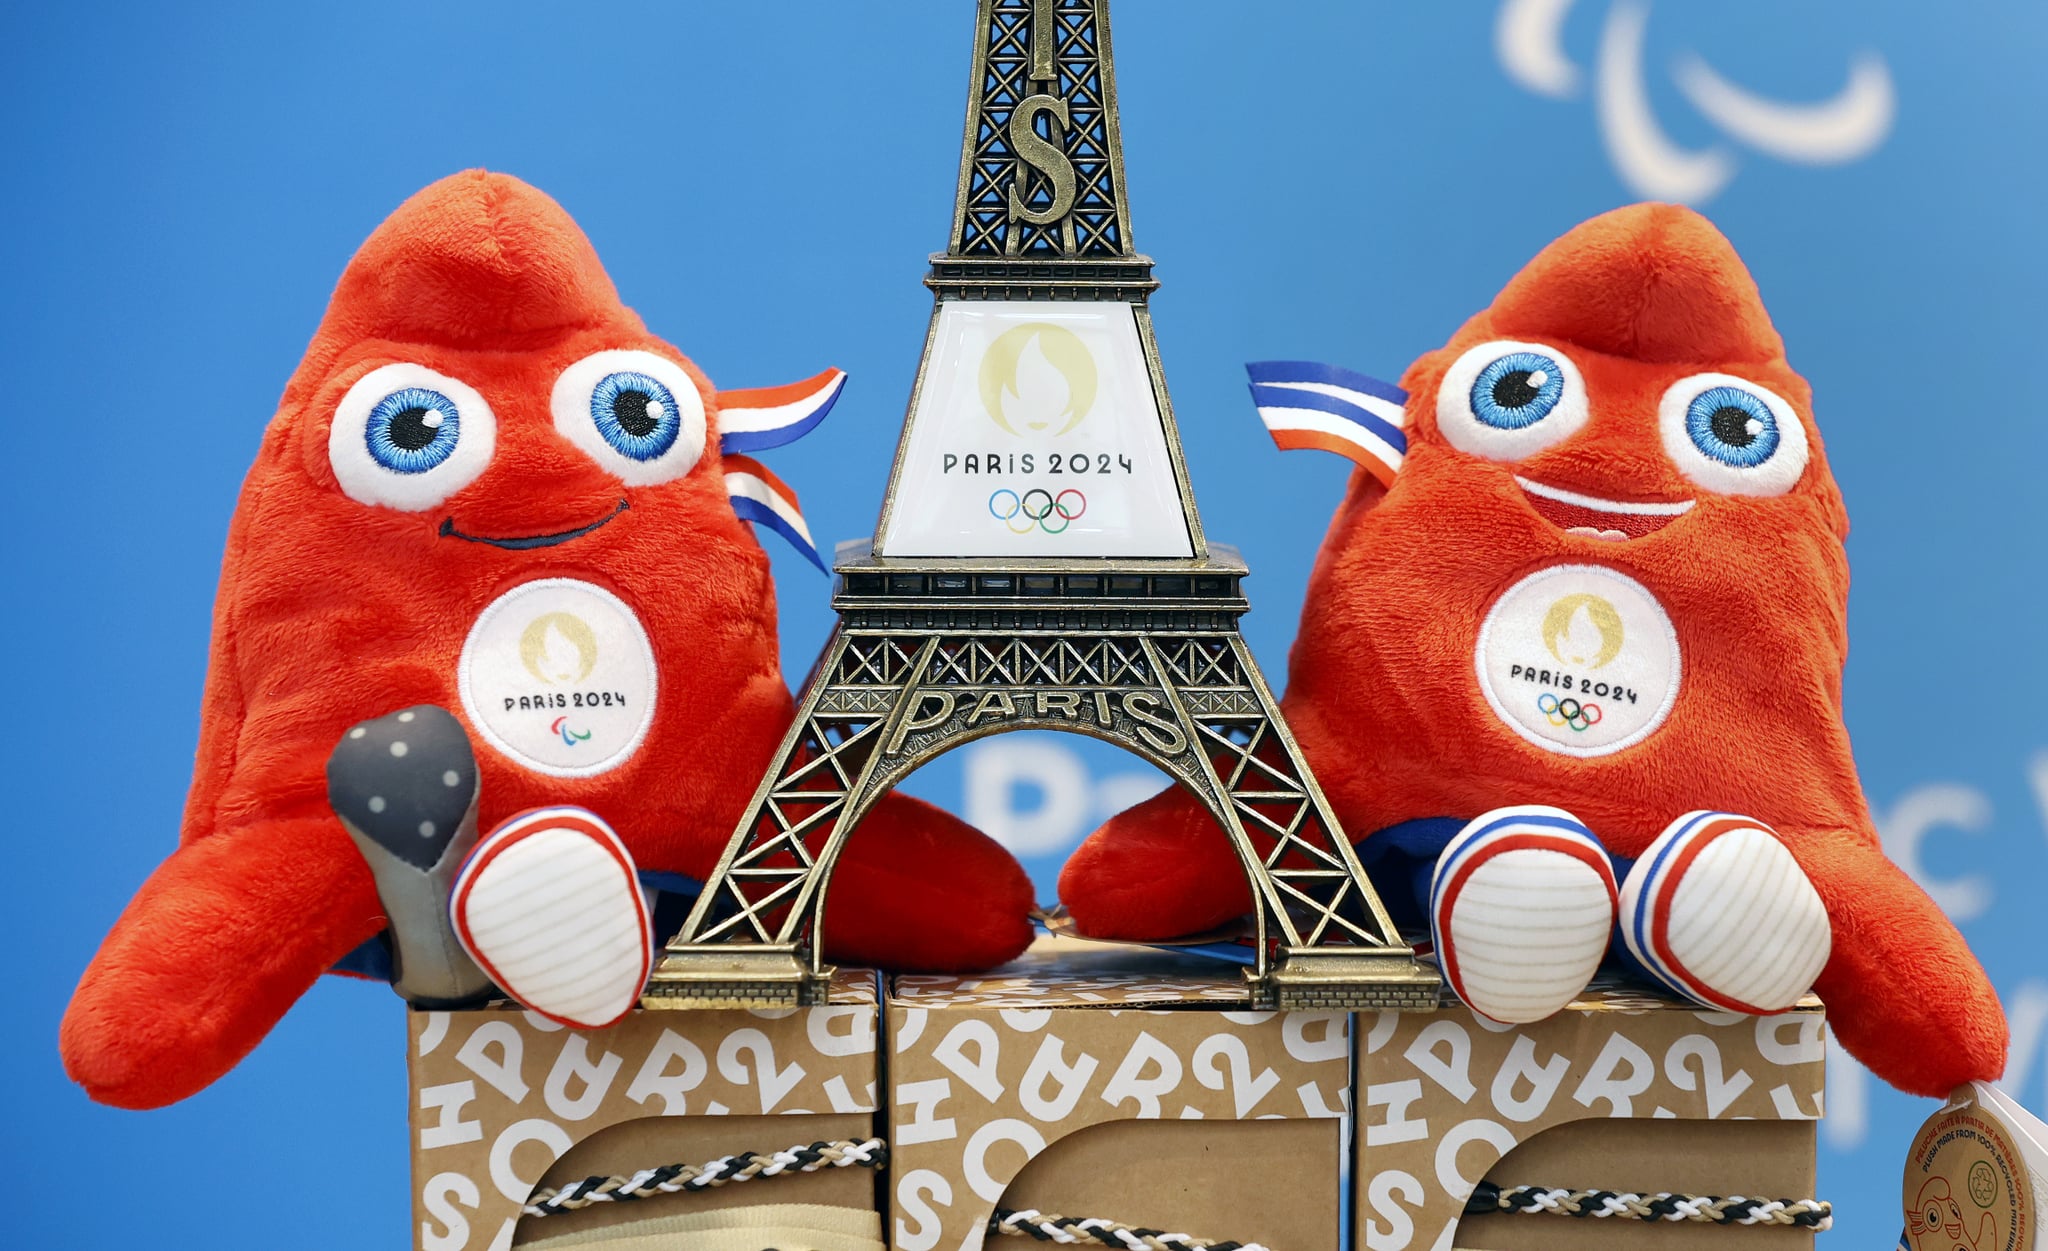 A replica of the Eiffel Tower with the logo of the 2024 Olympic Games surrounded by official mascots for the Paris 2024 Summer Olympic and Paralympic Games is displayed inside the official store entirely dedicated to the 2024 Olympic Games